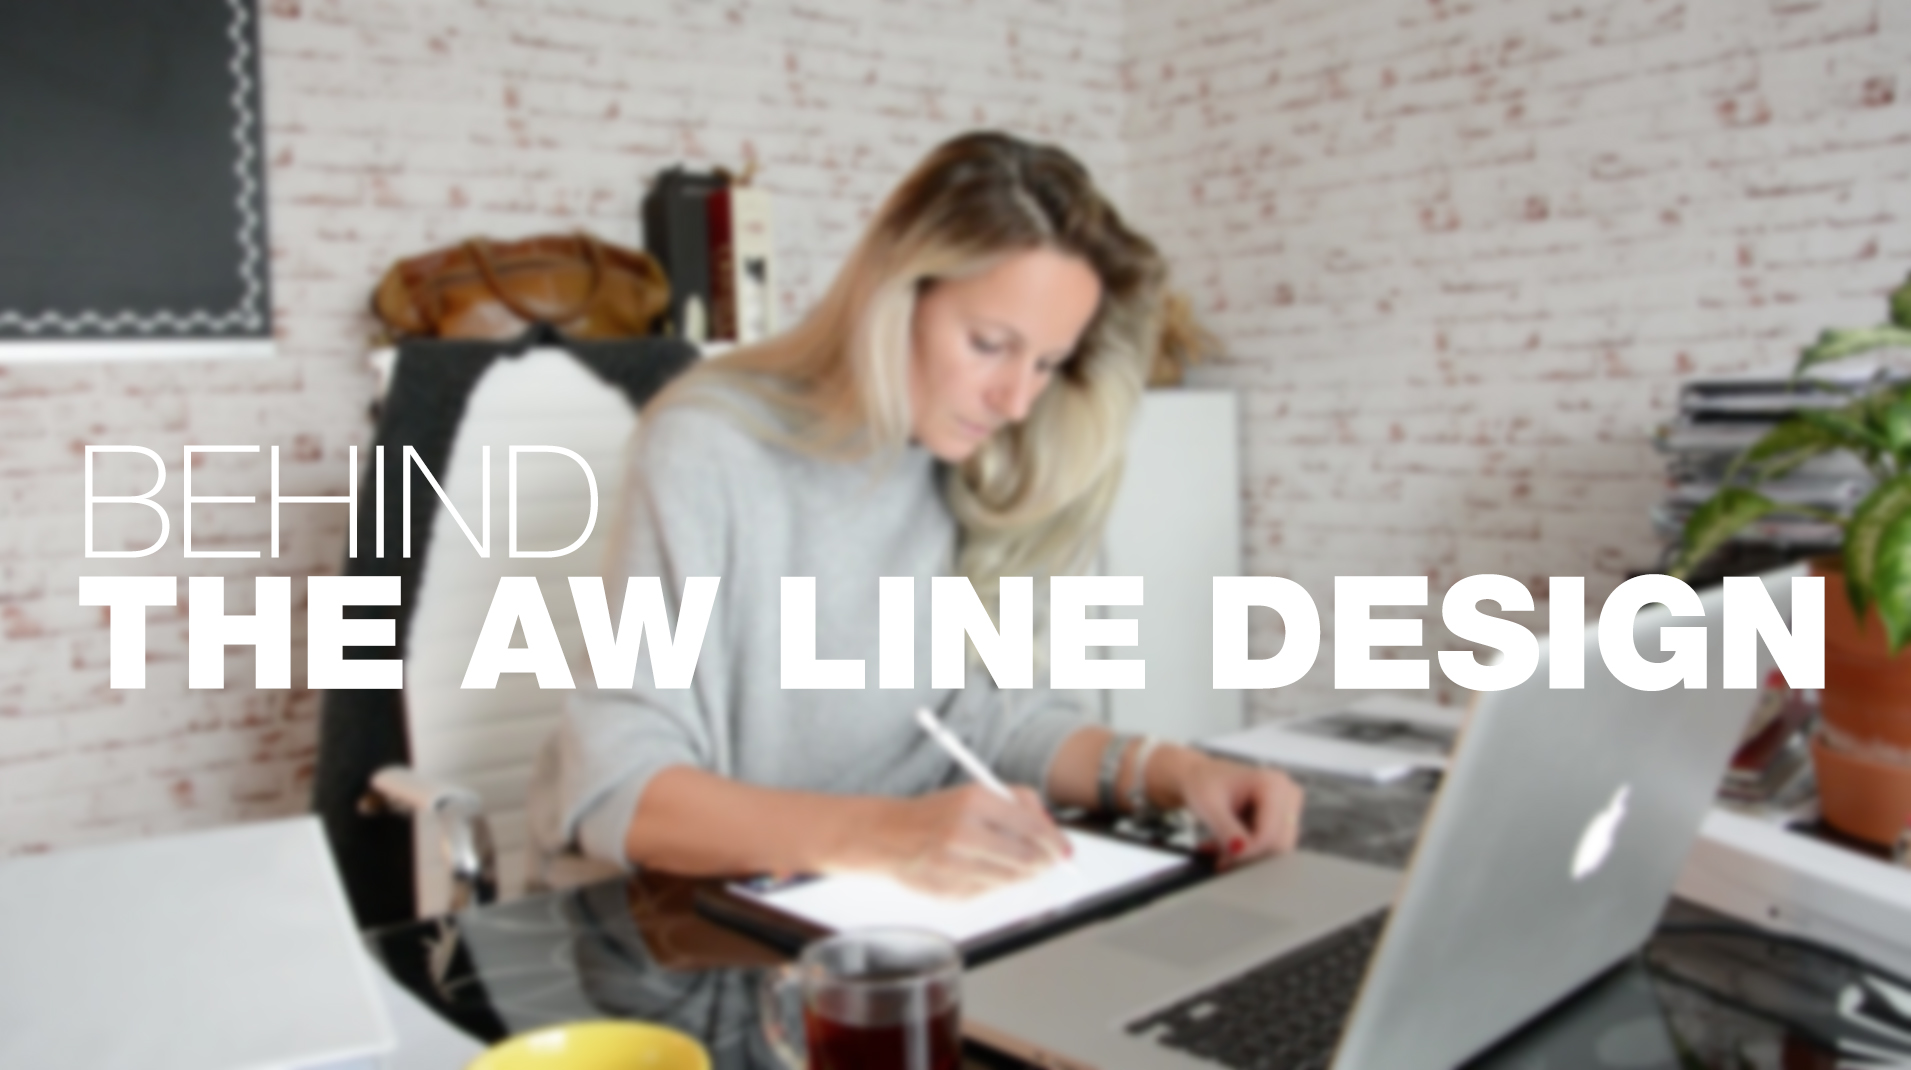 BEHIND THE AW LINE DESIGN